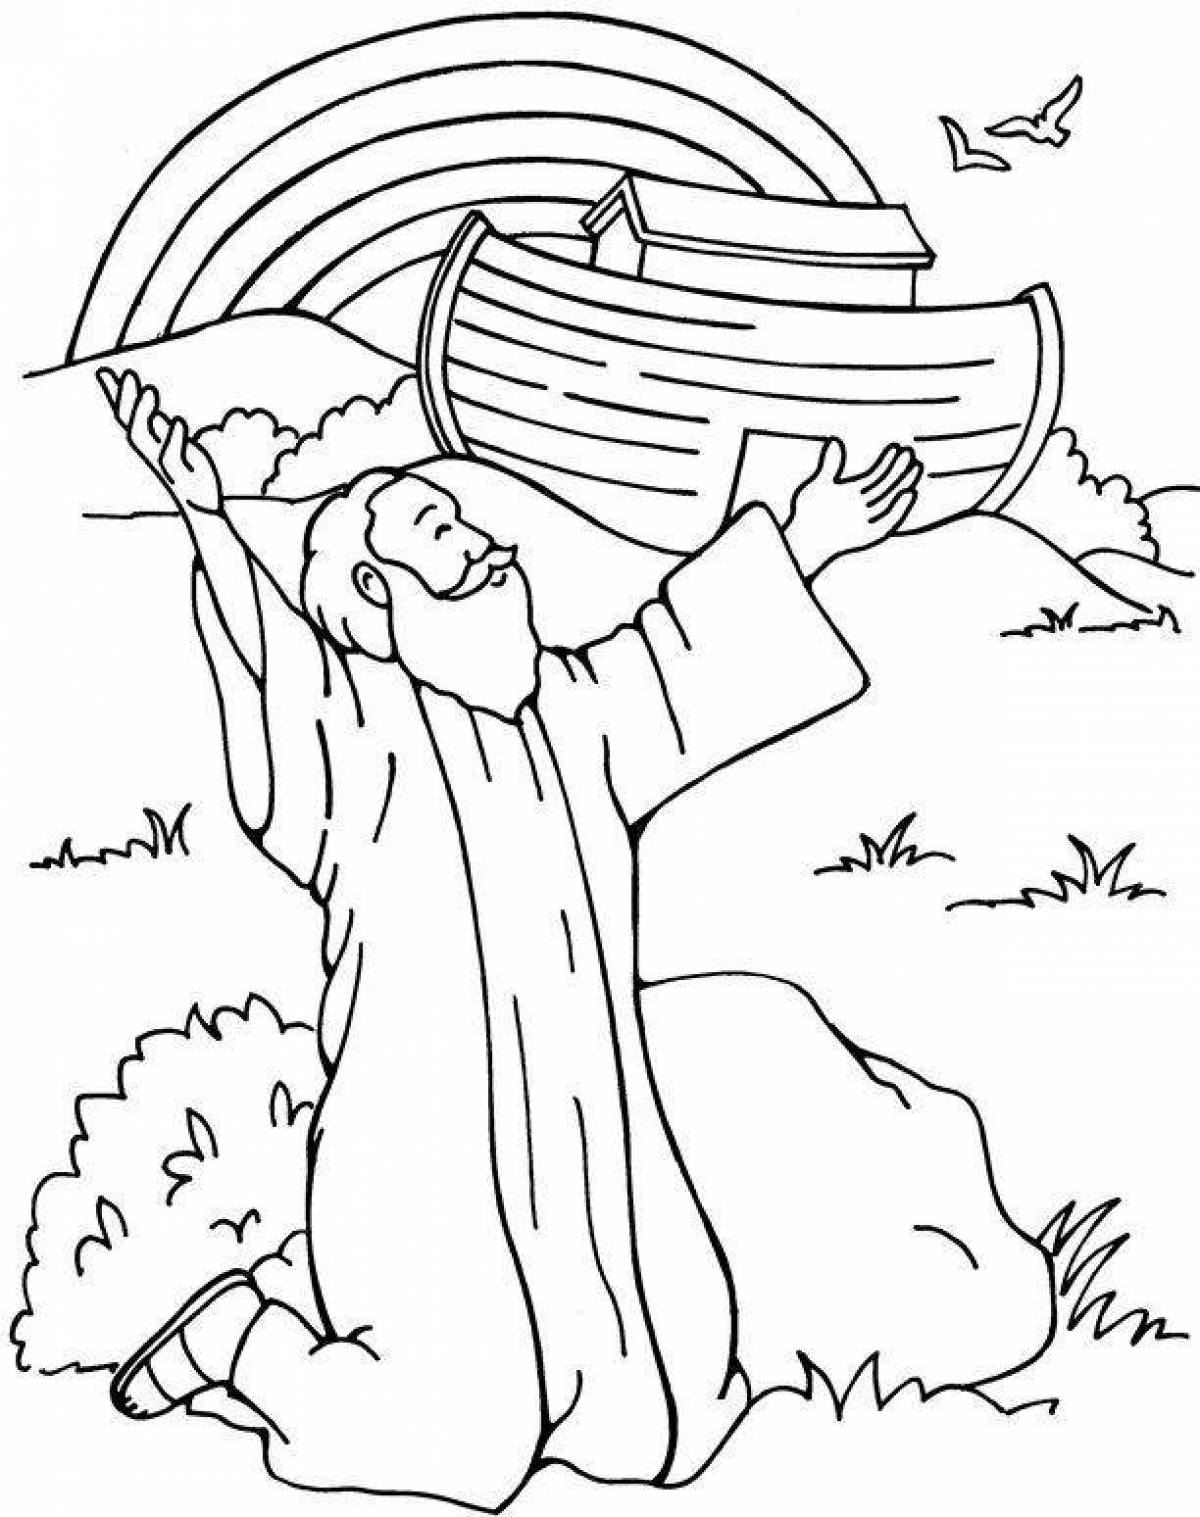 Radiant coloring page biblical sketch